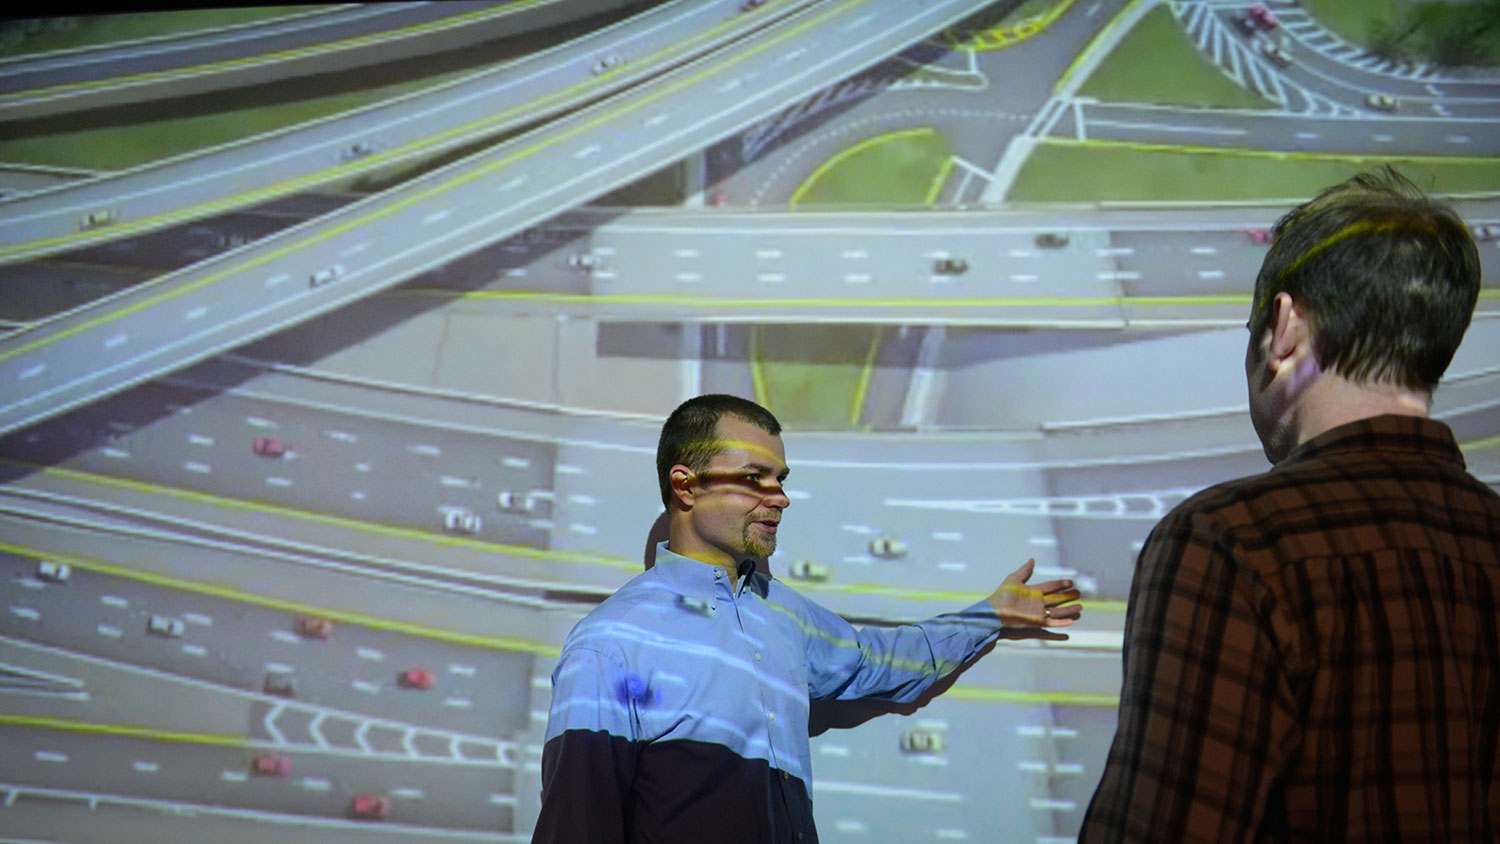 Dr. Bastian J. Schroeder, of the Institute for Transportation Research and Education (ITRE) at North Carolina State University, looks at a civil engineer project in the Teaching and visualization lab in the Hunt Library. Photo by Marc Hall